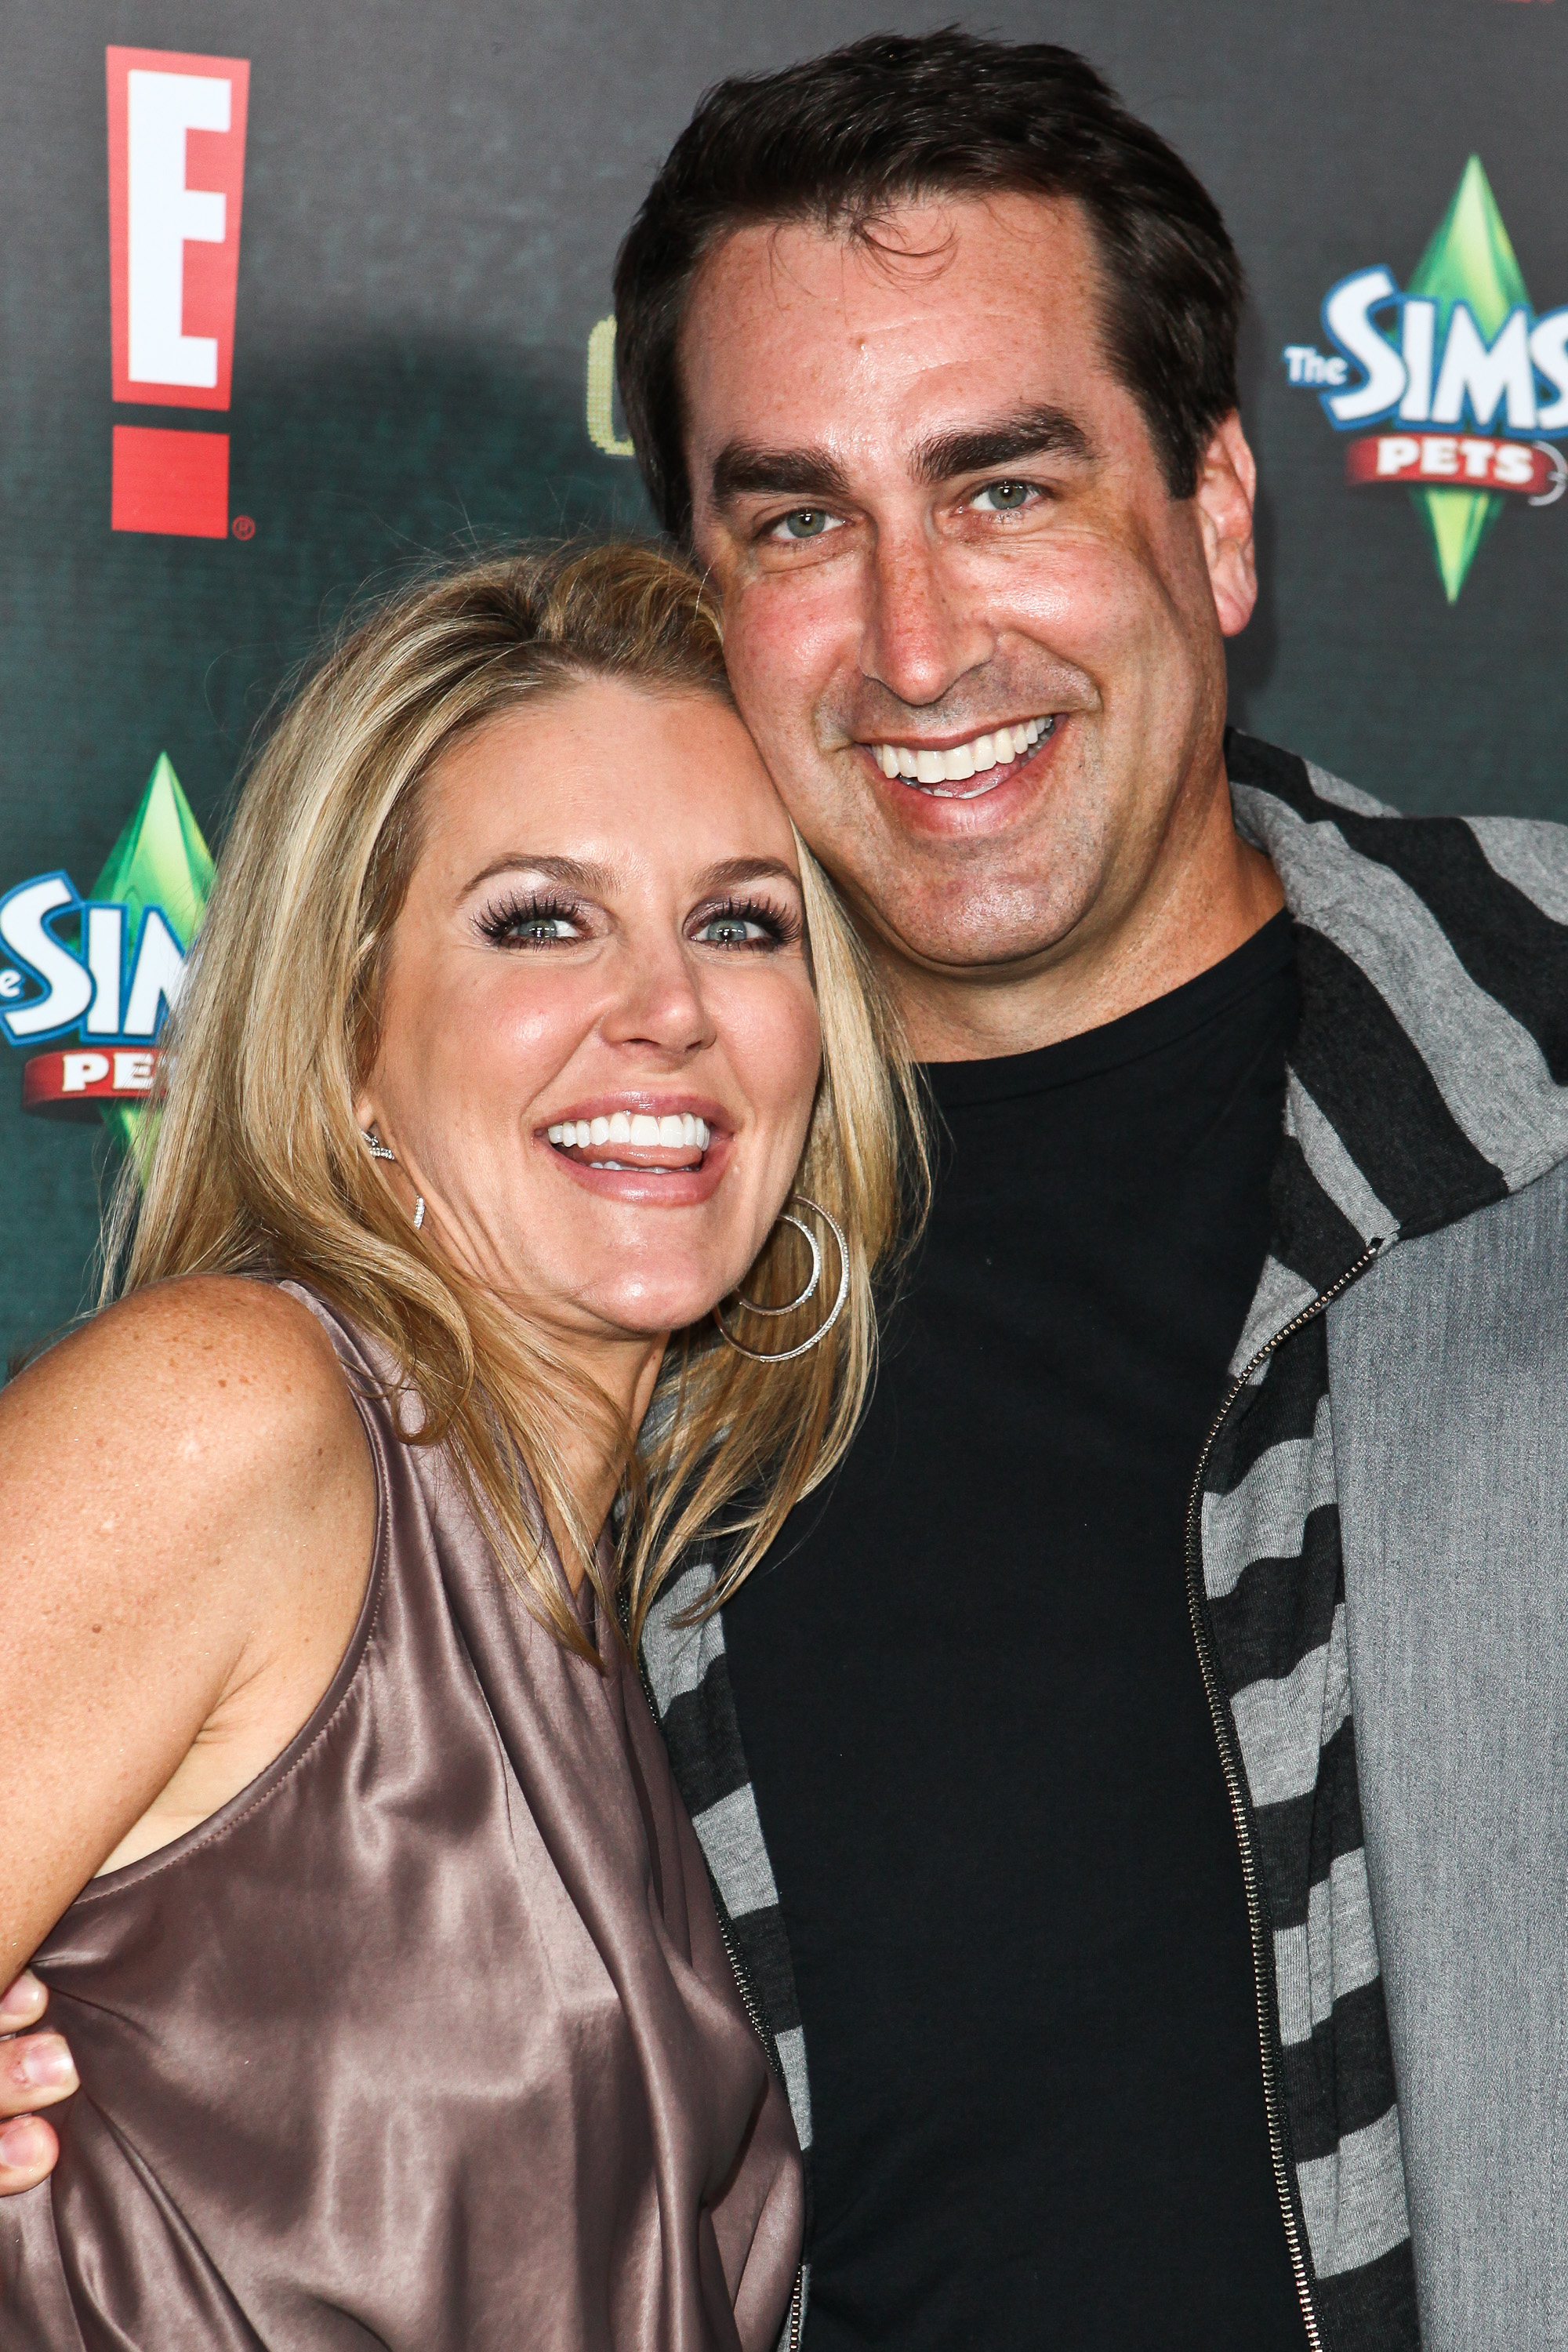 Tiffany Riggle and Rob Riggle at Variety's Power of Comedy event on November 19, 2011, in Hollywood, California. | Source: Getty Images